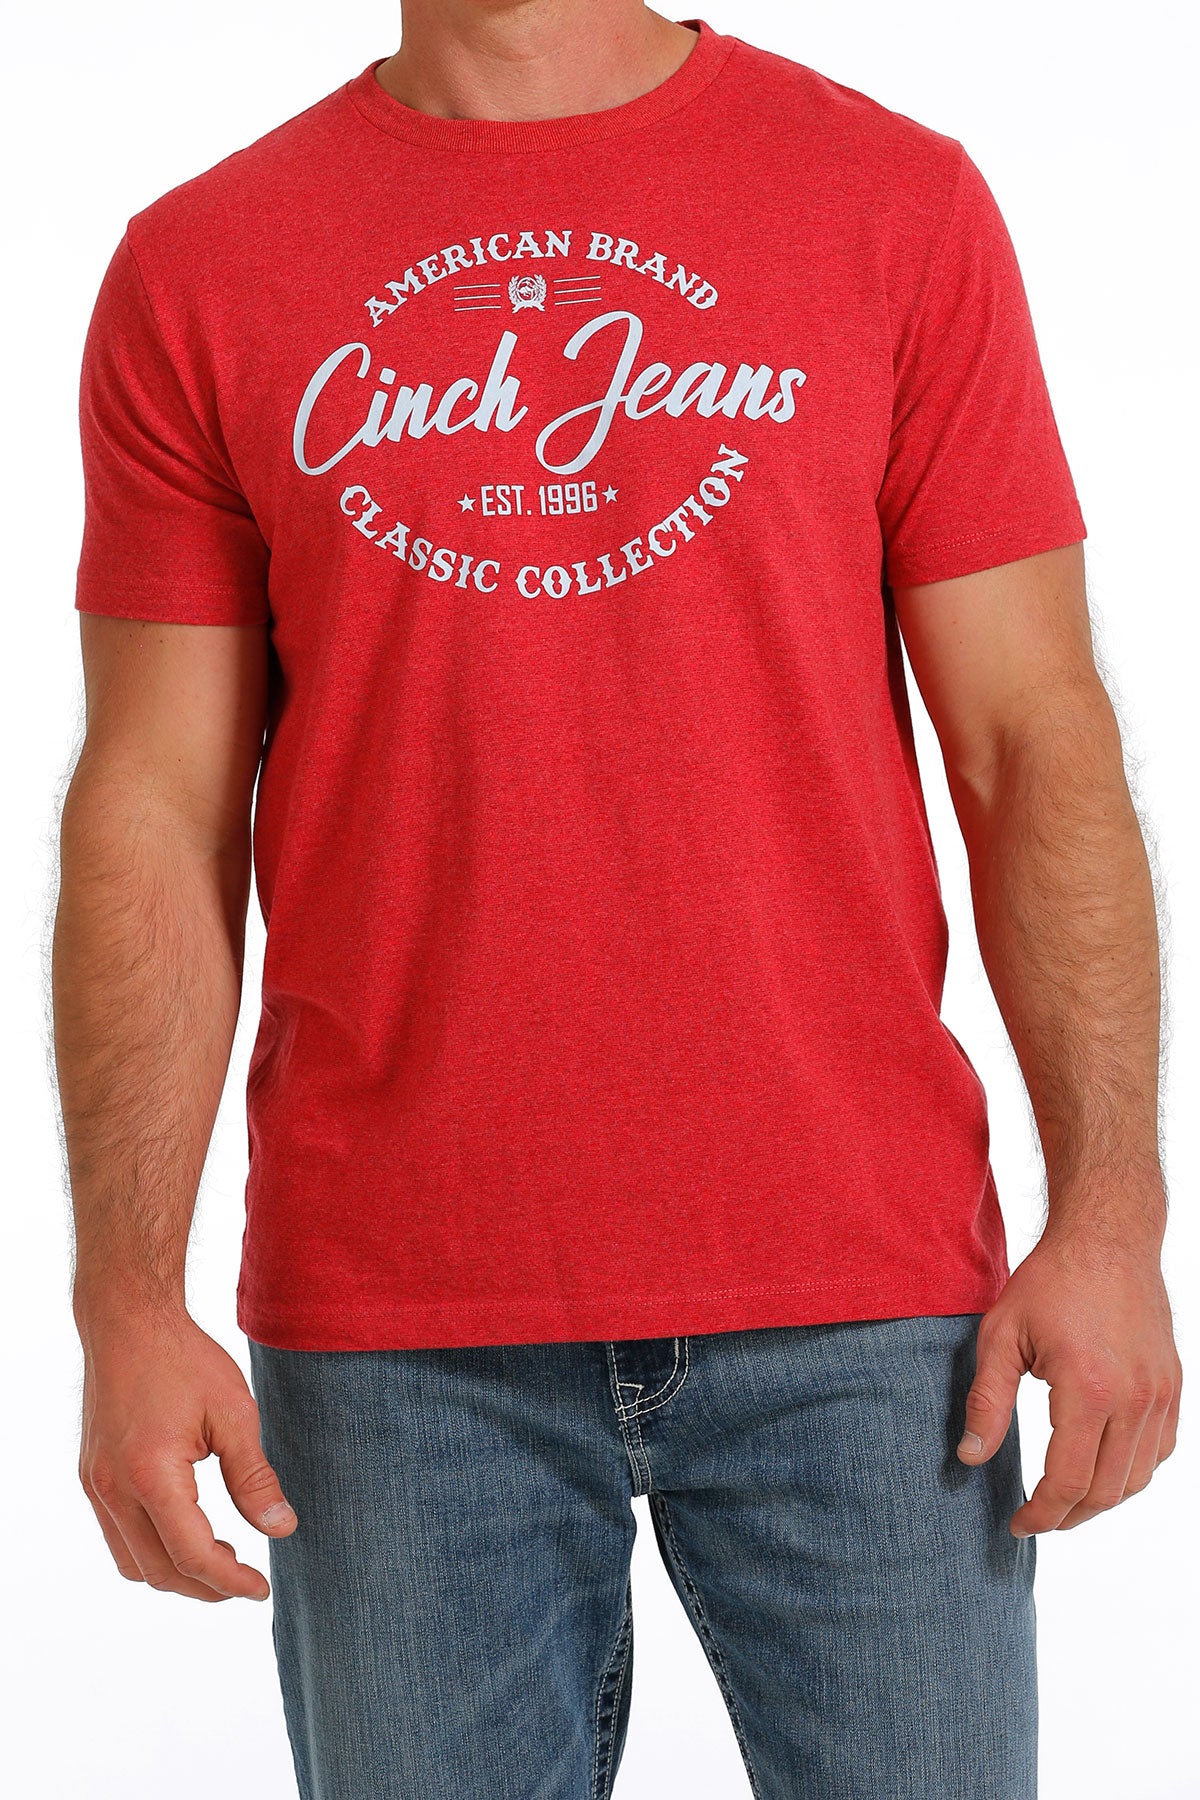 CINCH MEN'S AMERICAN BRAND CLASSIC COLLECTION TEE - RED